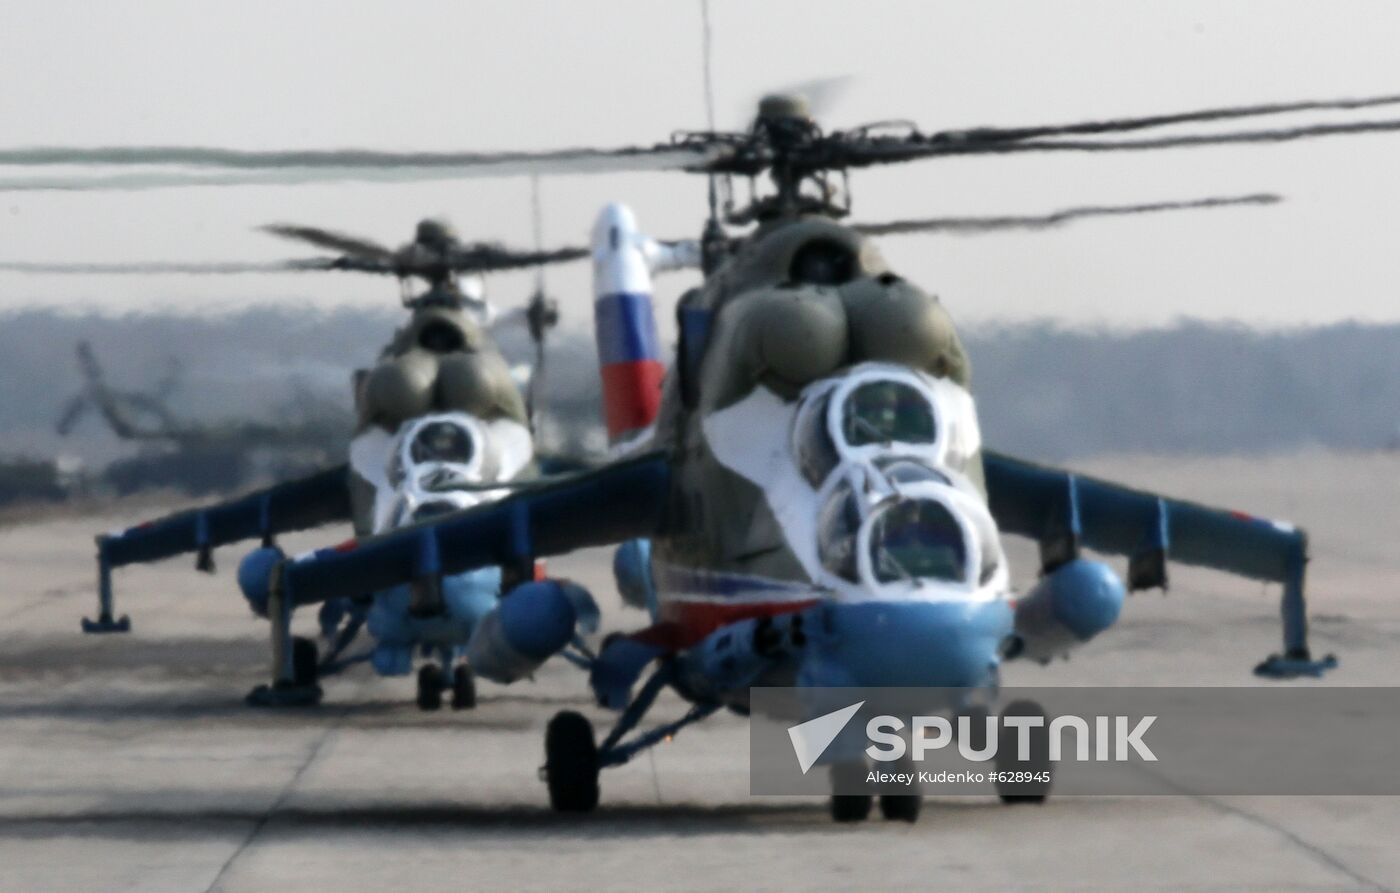 Mi-24 helicopters